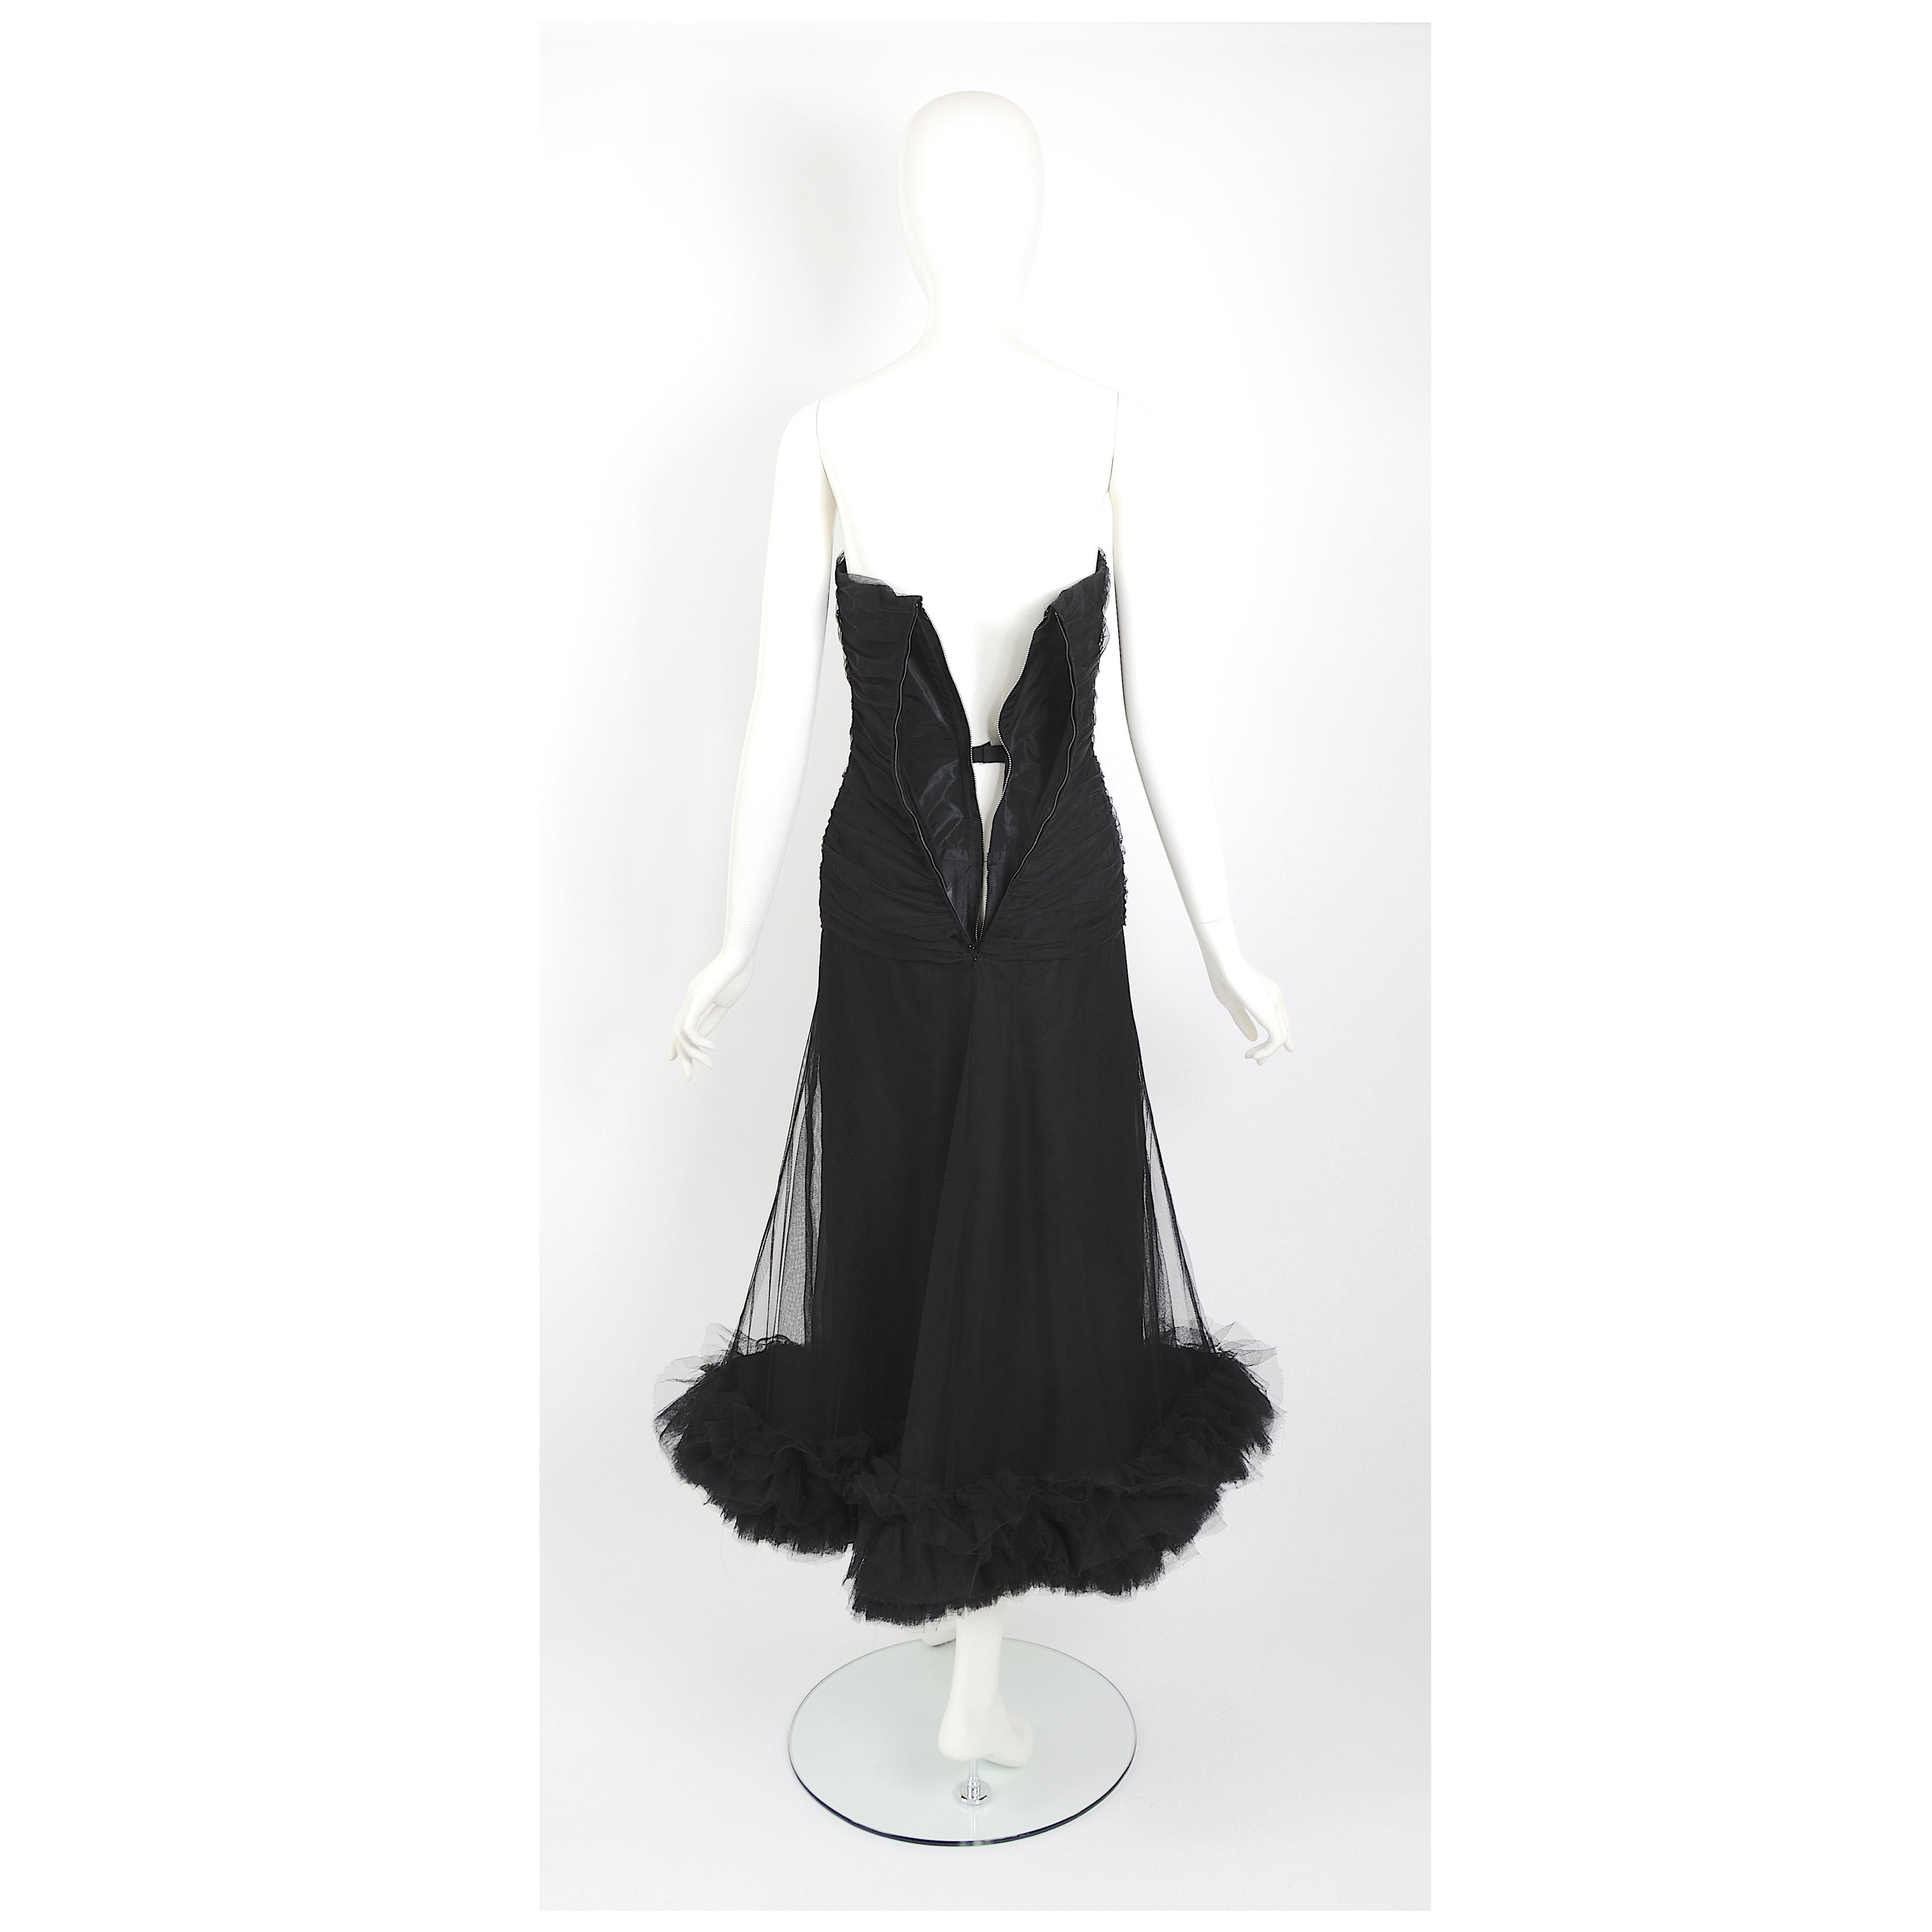 Christian Dior by Marc Bohan vintage numbered couture black tulle evening dress For Sale 3